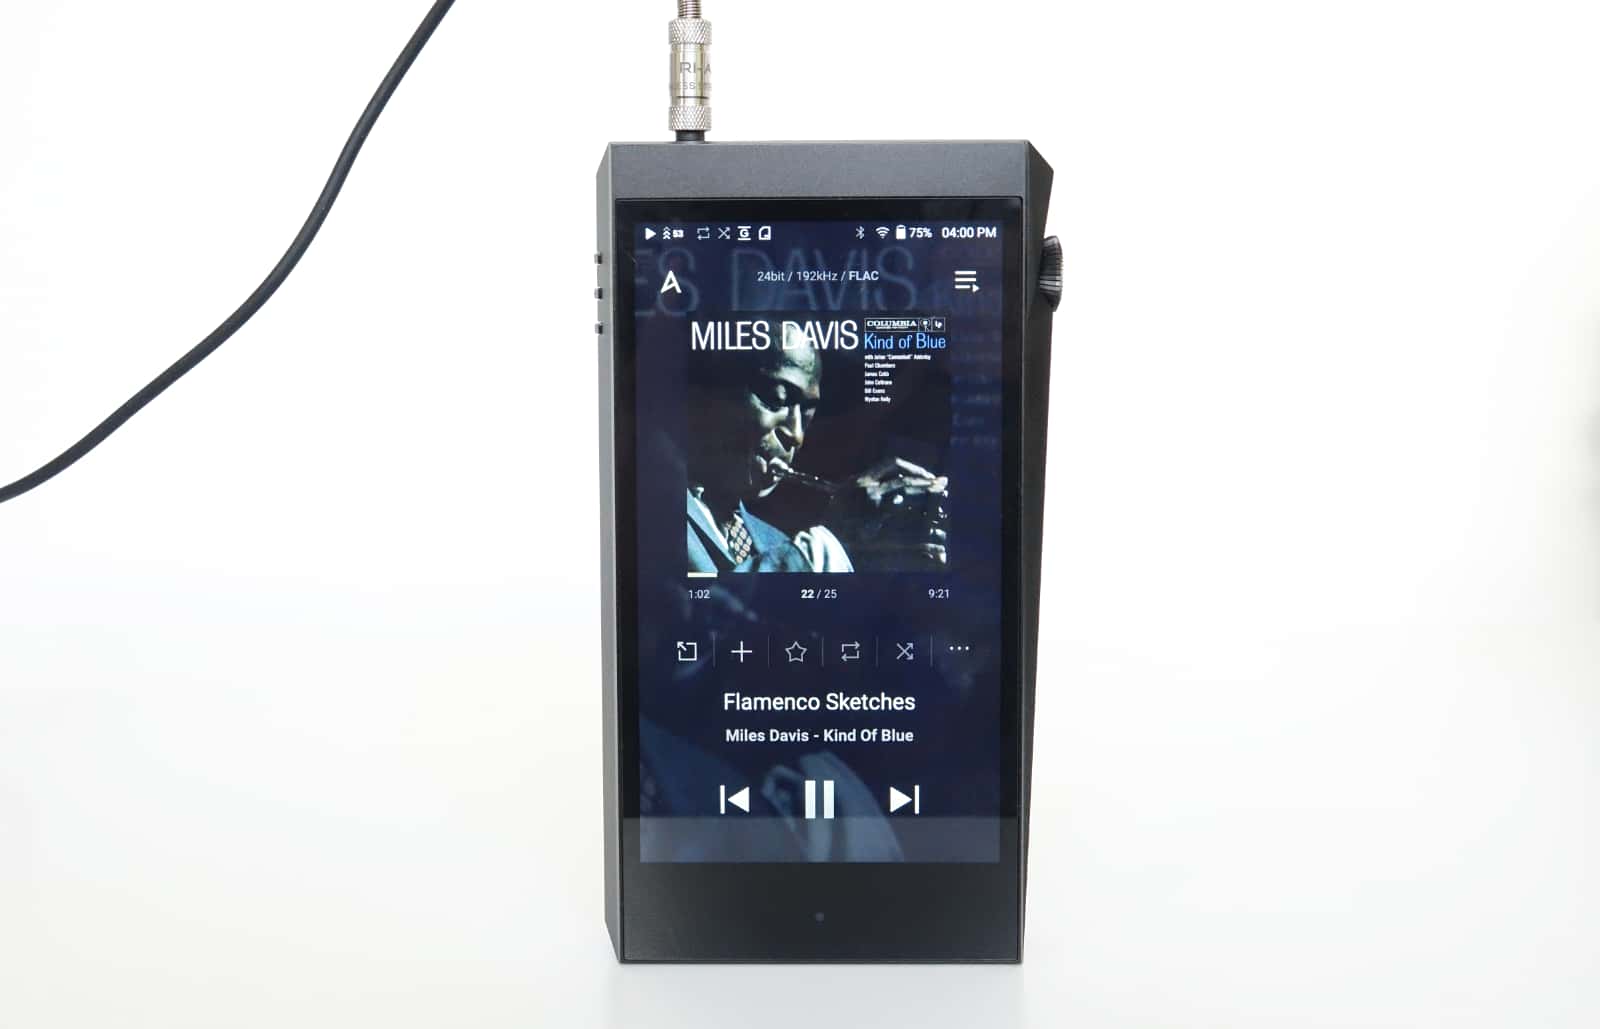 Astell & Kern SP2000T reviewed